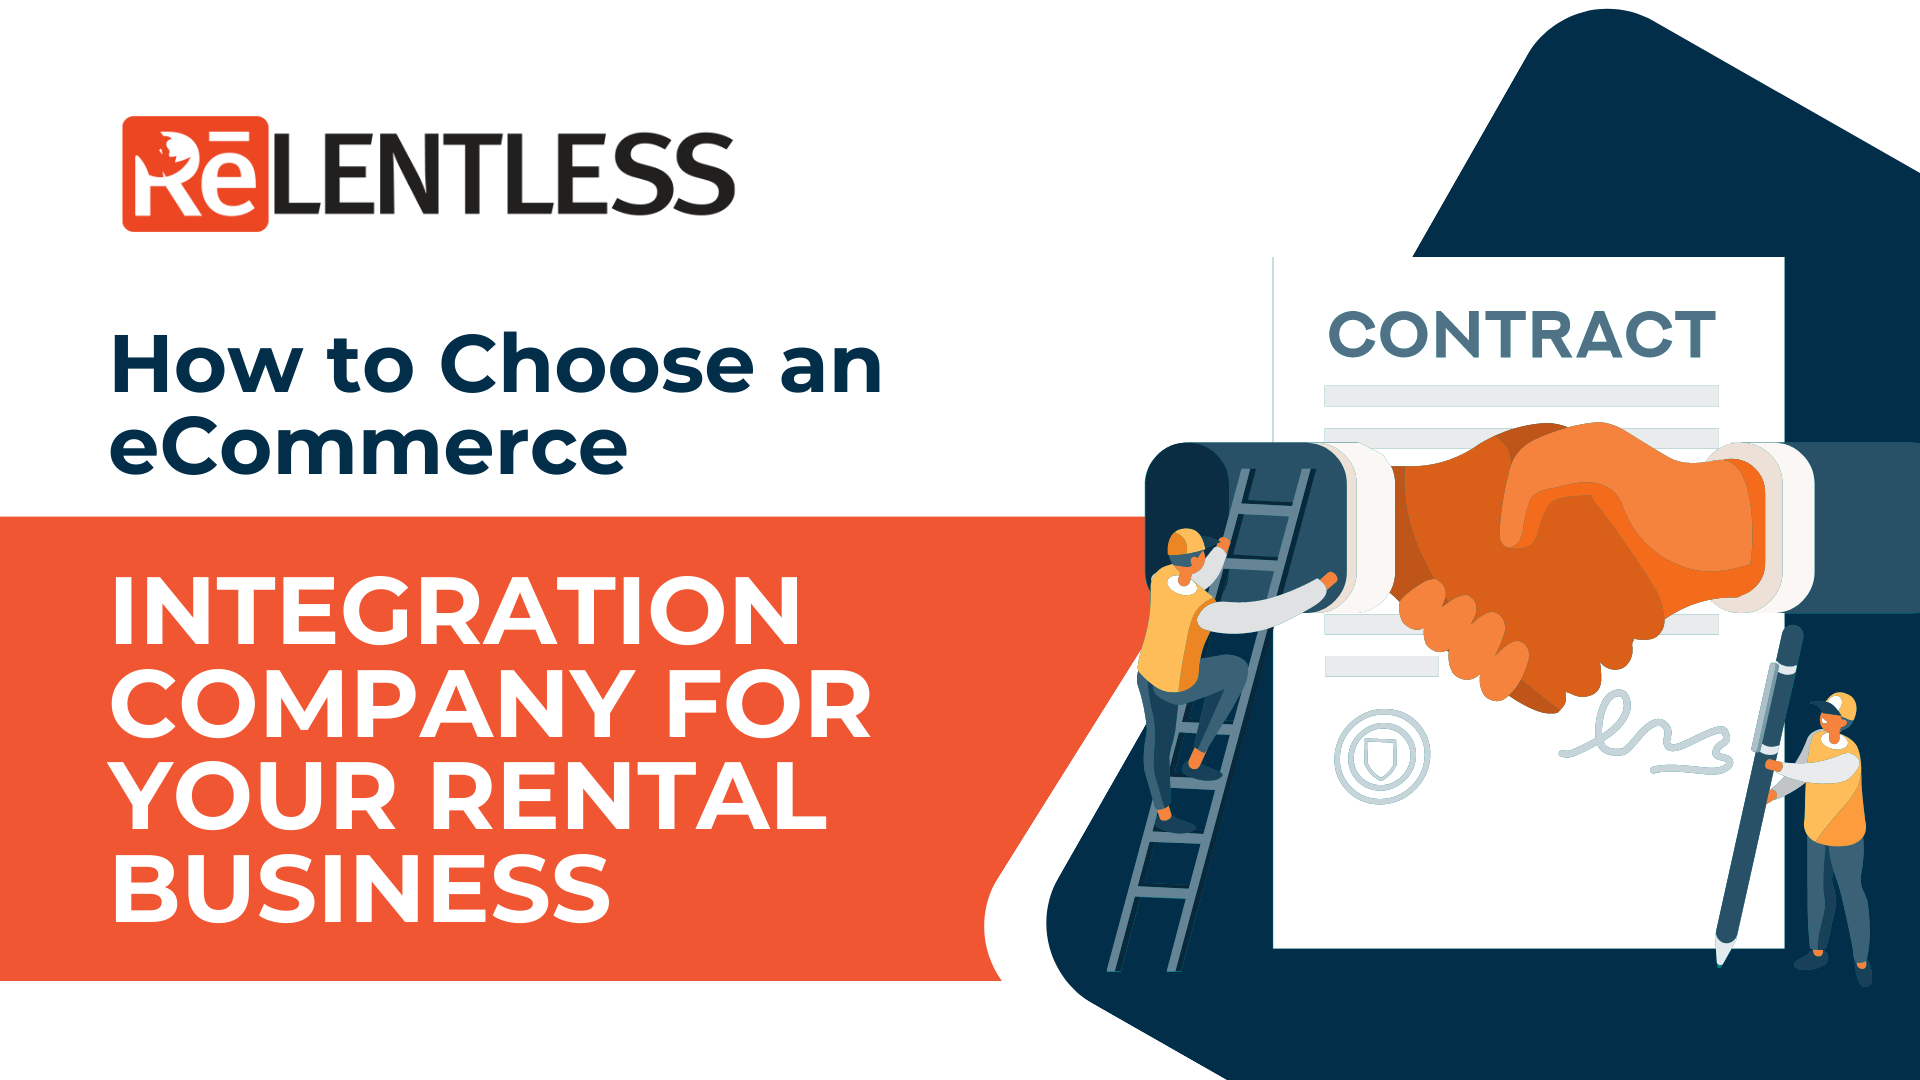 How to Choose an eCommerce Integration Company for Your Rental Business